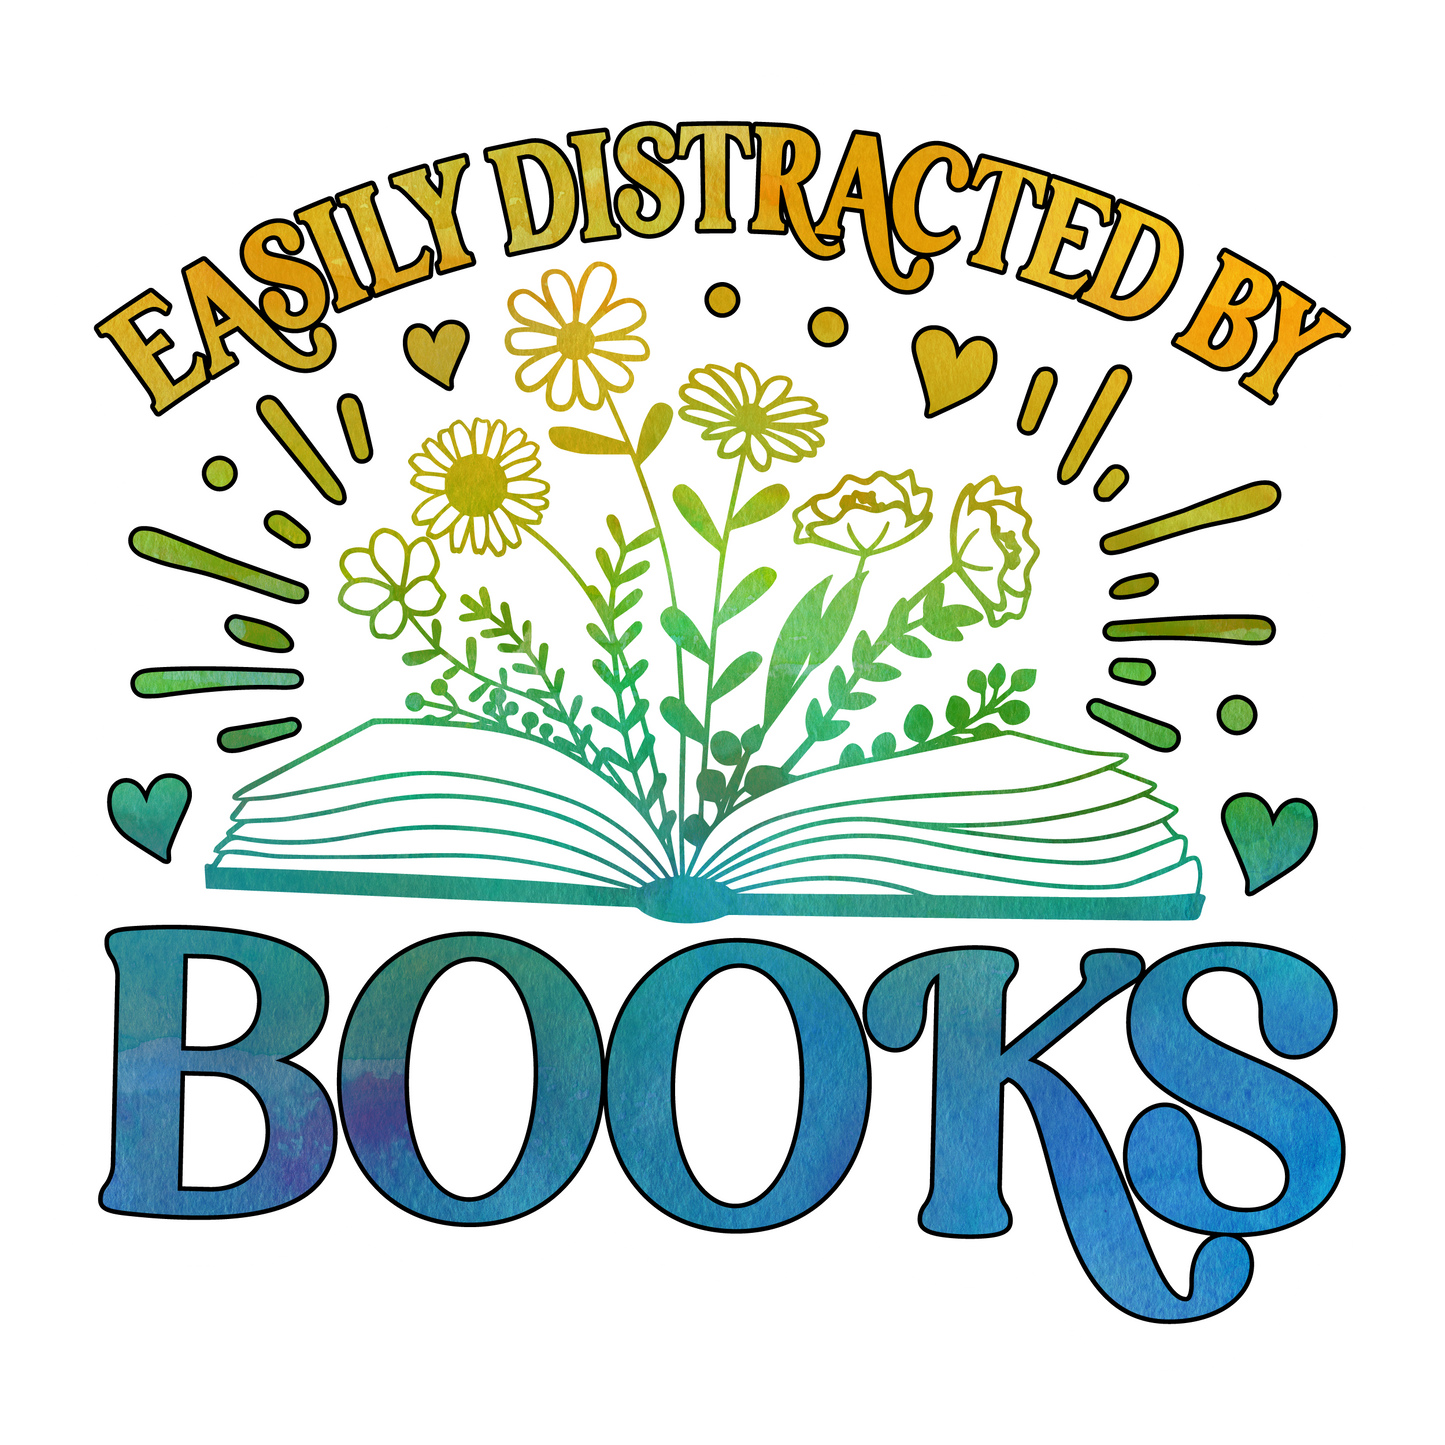 Stickers - Easily Distracted By Books Sticker, Book Lovers' Stickers